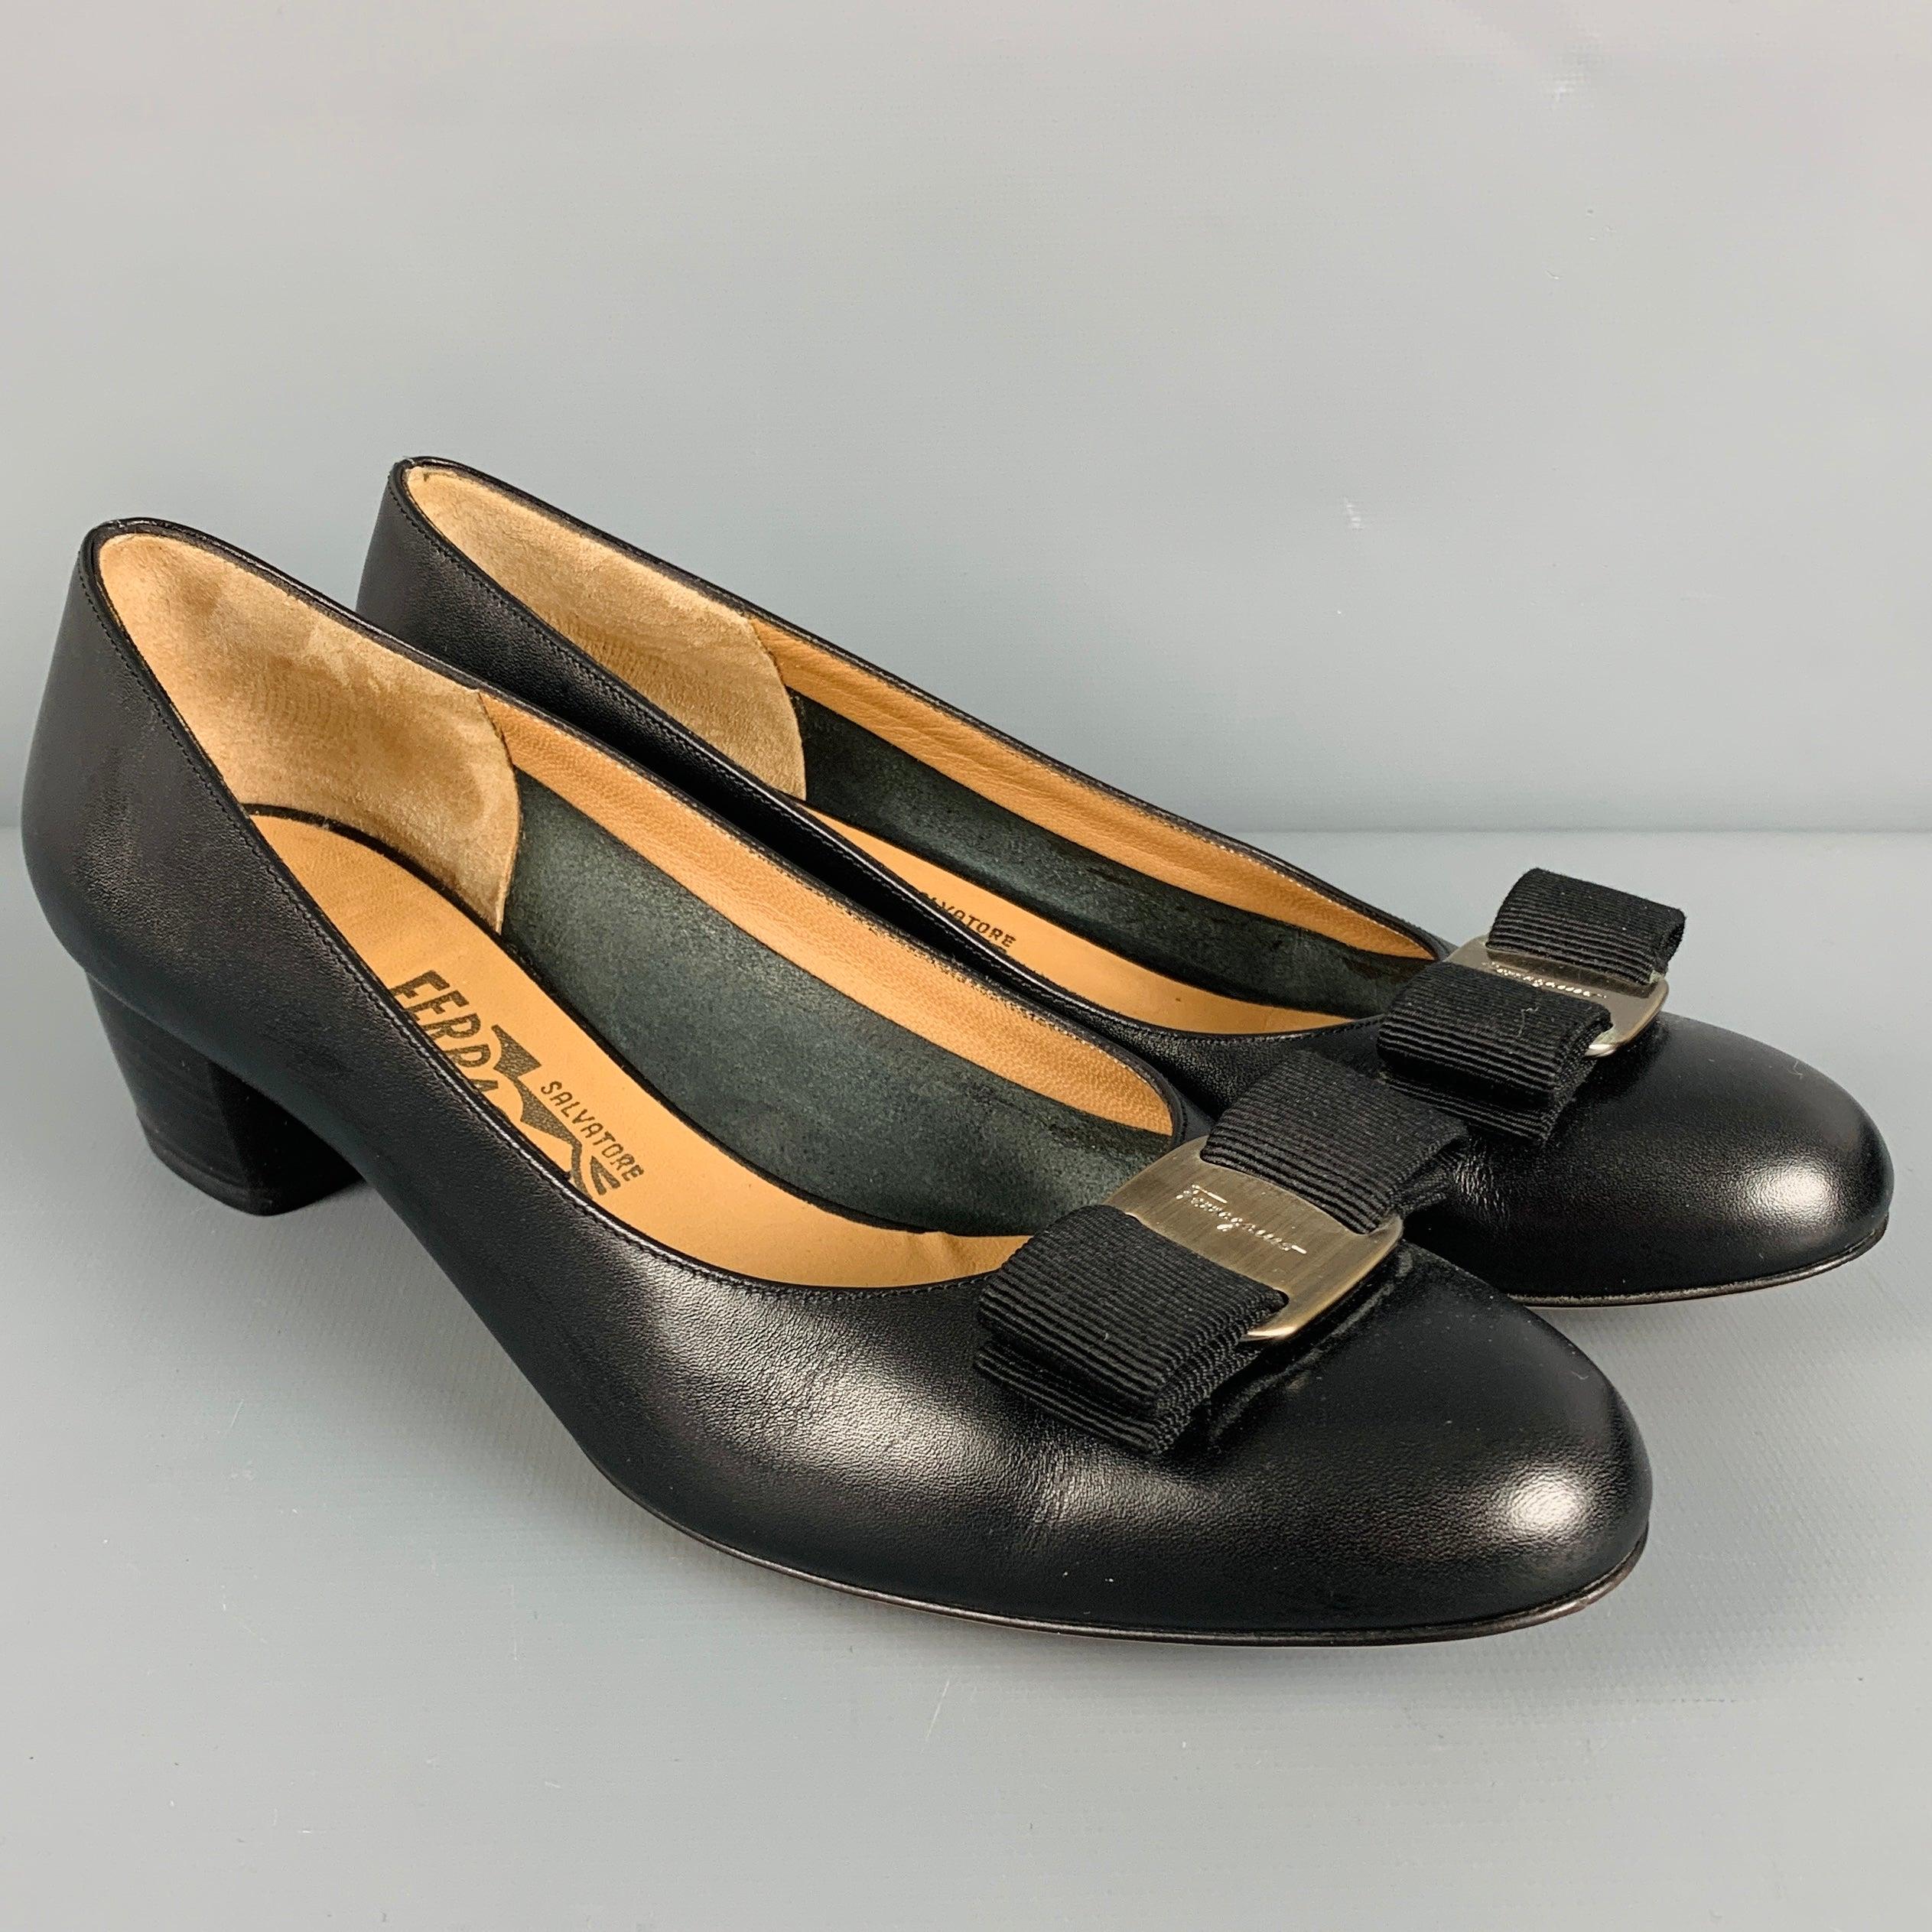 SALVATORE FERRAGAMO heels
in black leather featuring black fabric bow details with silver tone Ferragamo buckles, and chunky kitten heel. Made in Italy.Excellent Pre-Owned Condition. 

Marked:   DB04223 C839 X 7 BOutsole: 9.5 x 3 inches 
  
  
